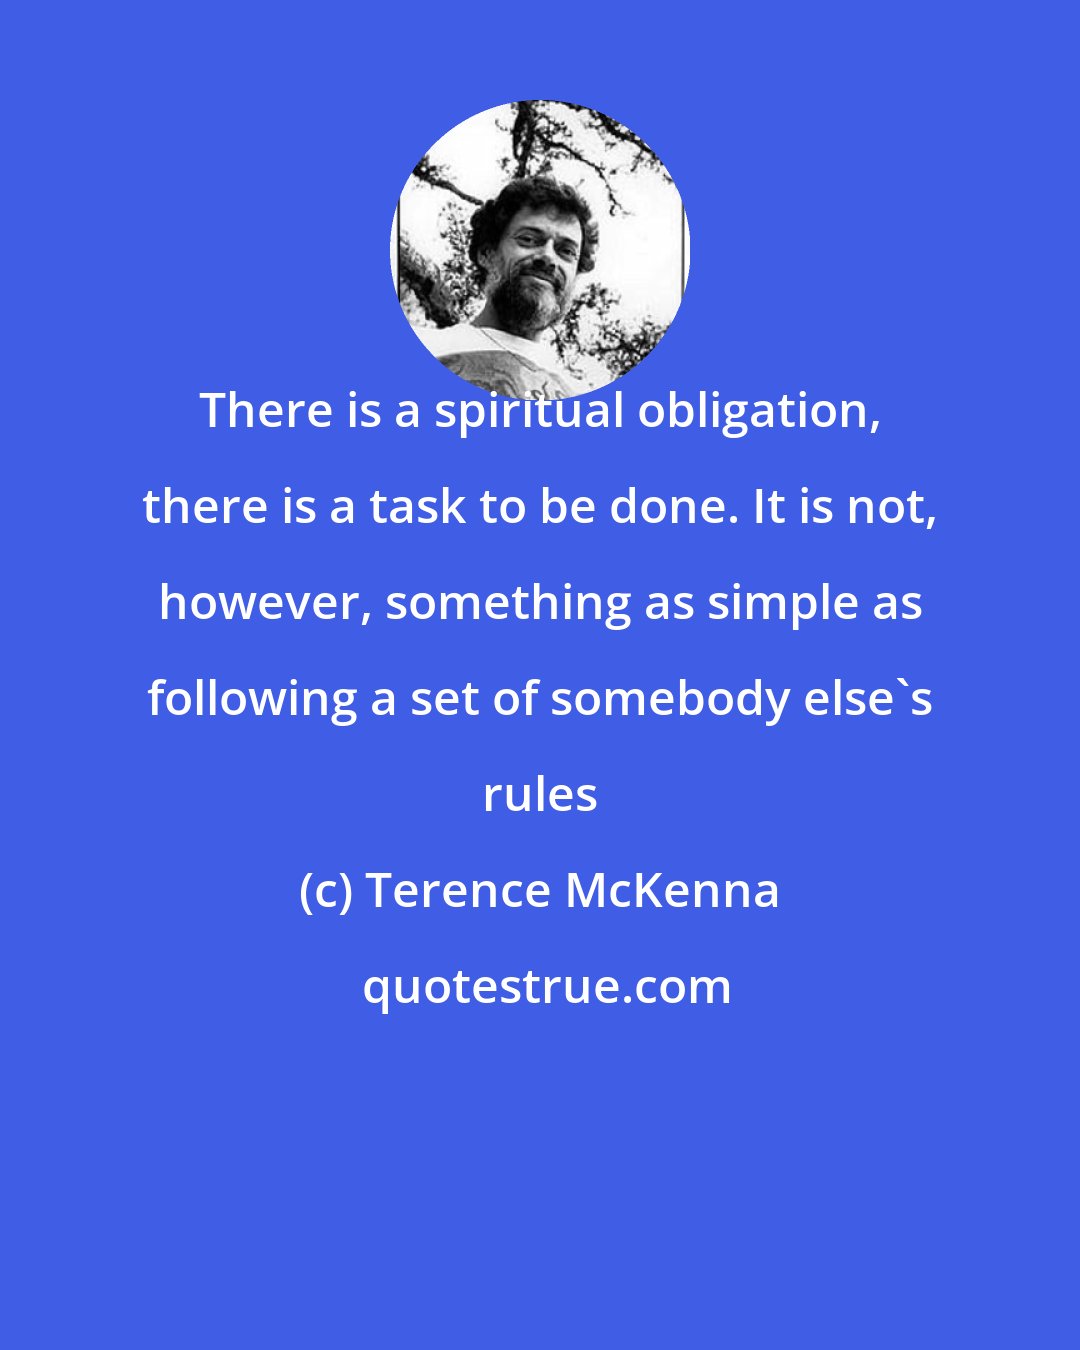 Terence McKenna: There is a spiritual obligation, there is a task to be done. It is not, however, something as simple as following a set of somebody else's rules